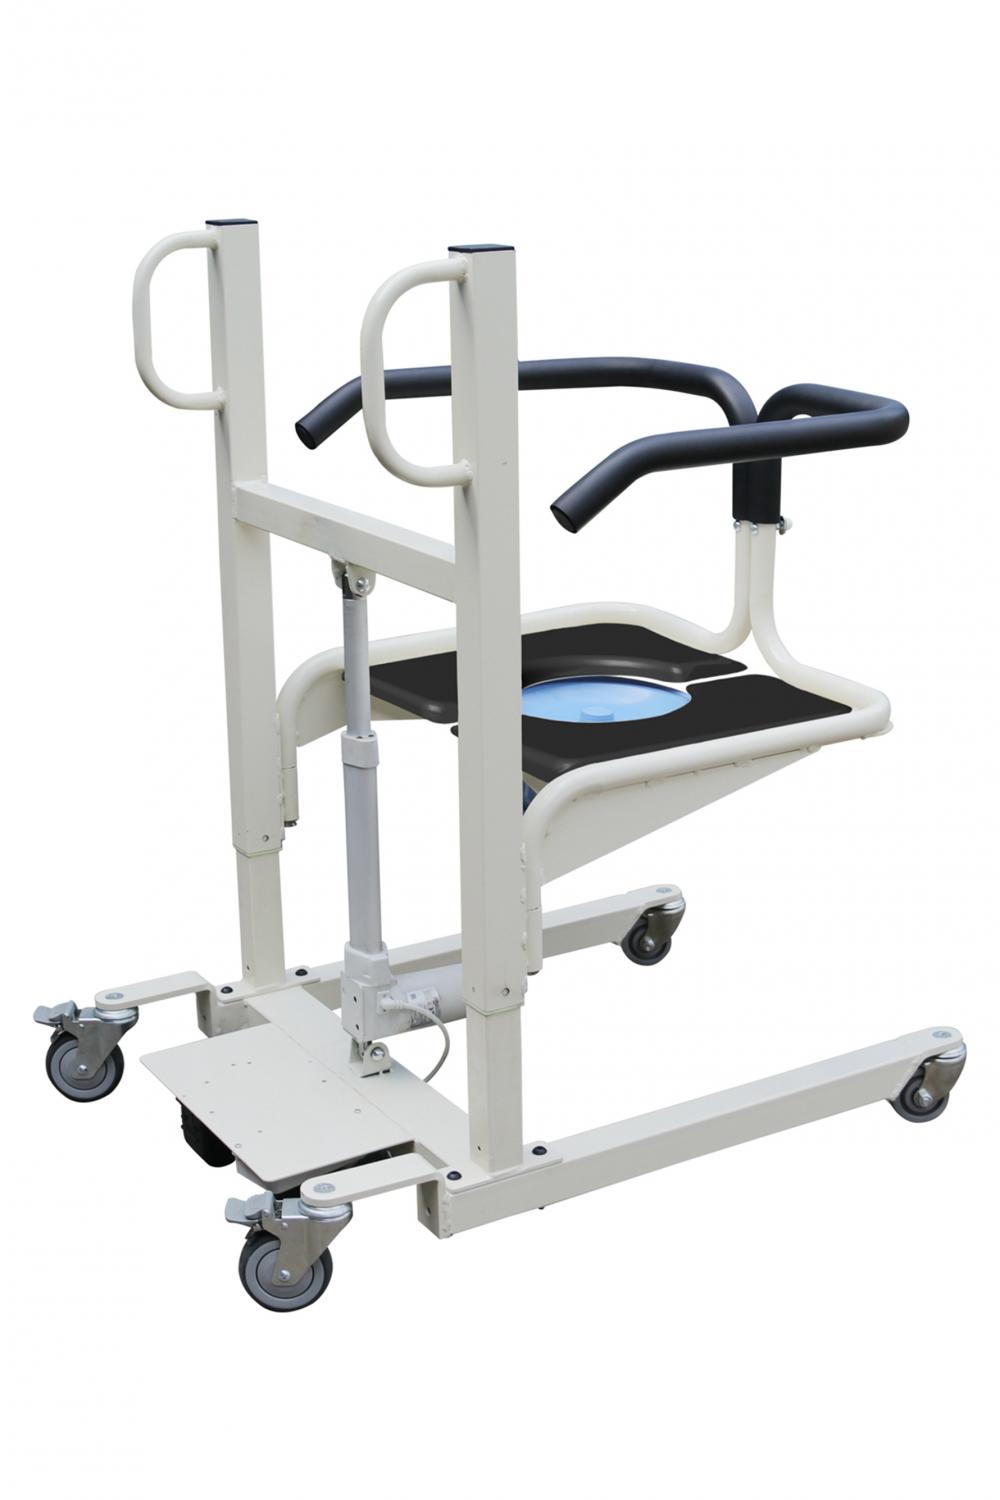 Powered Patient Lifting Devices for Home Use